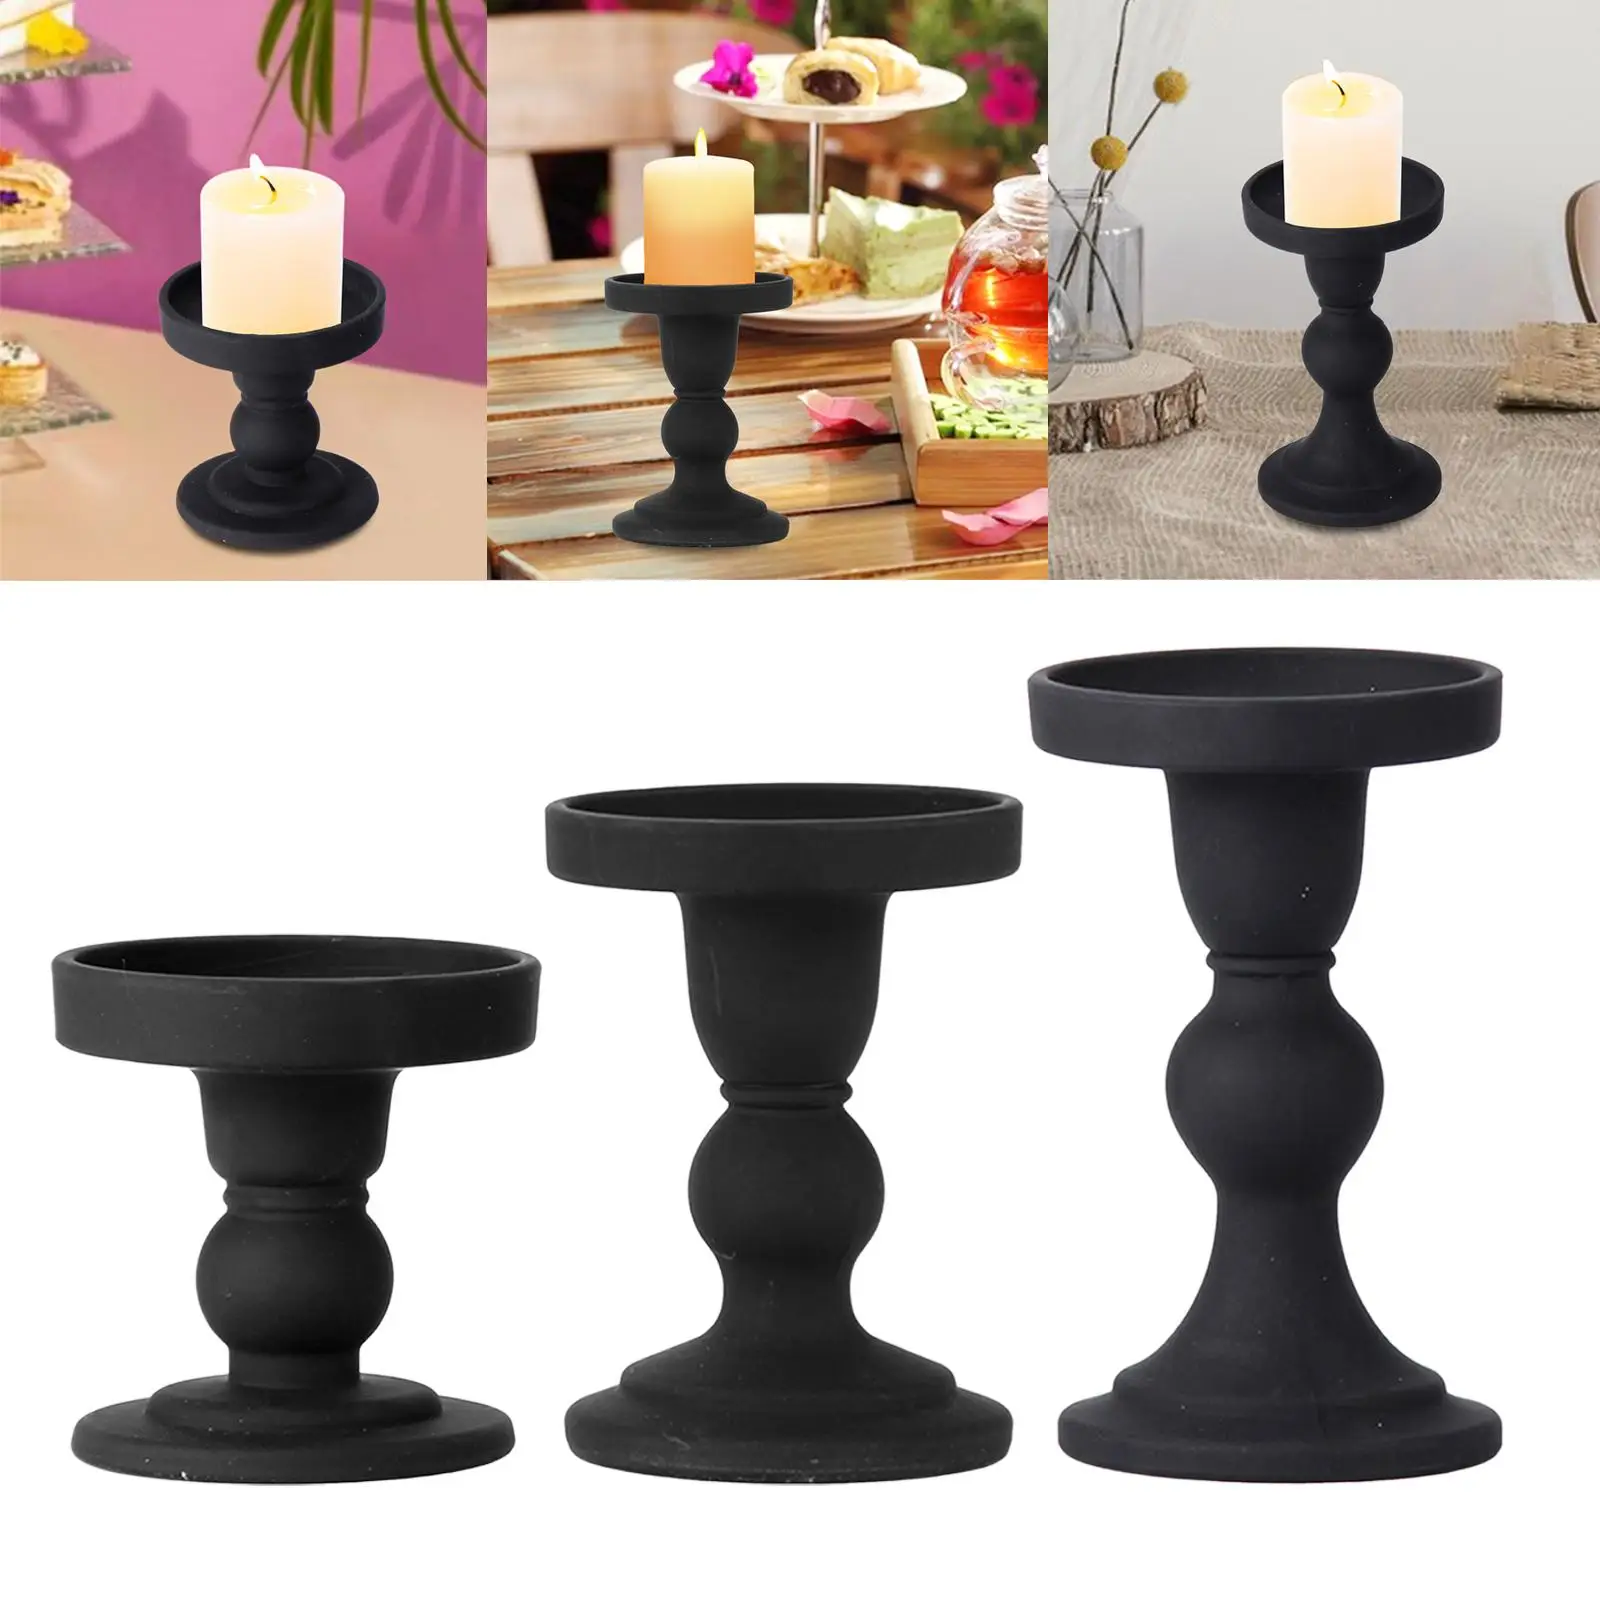 Modern Candlestick Holder Candle Stand Glass Pillar Candle Holder for Festival Wedding Dinning Room Holiday Table Centerpiece